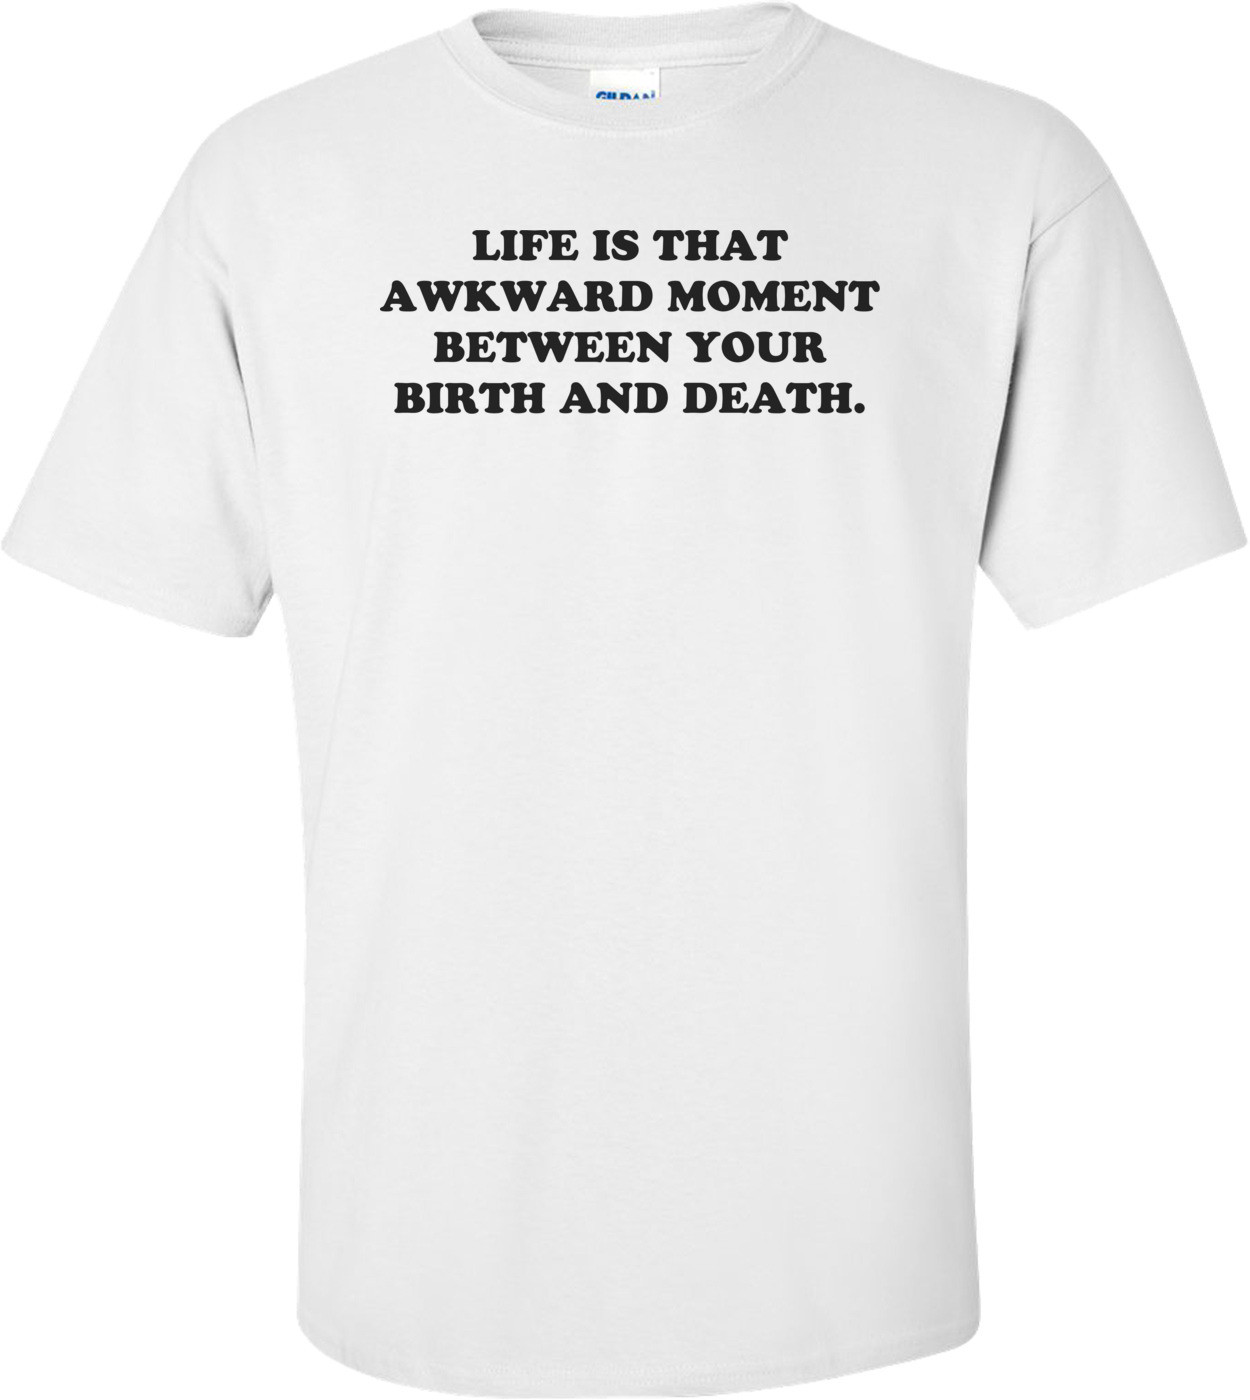 LIFE IS THAT AWKWARD MOMENT BETWEEN YOUR BIRTH AND DEATH. Shirt